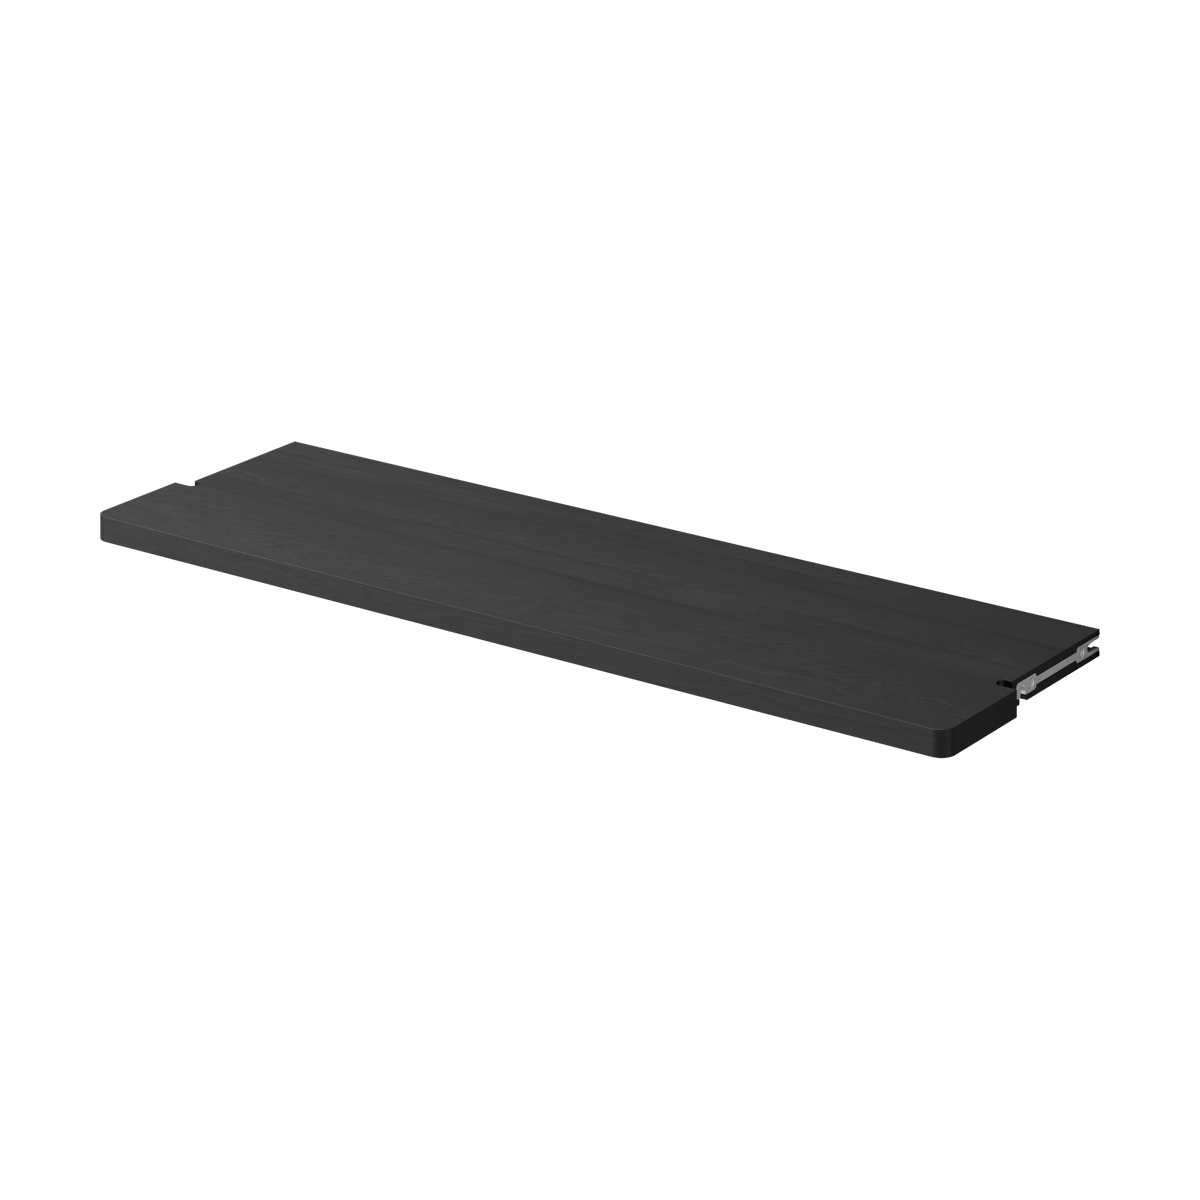 Massproductions Gridlock Shelf W800 plank Black stained Ash